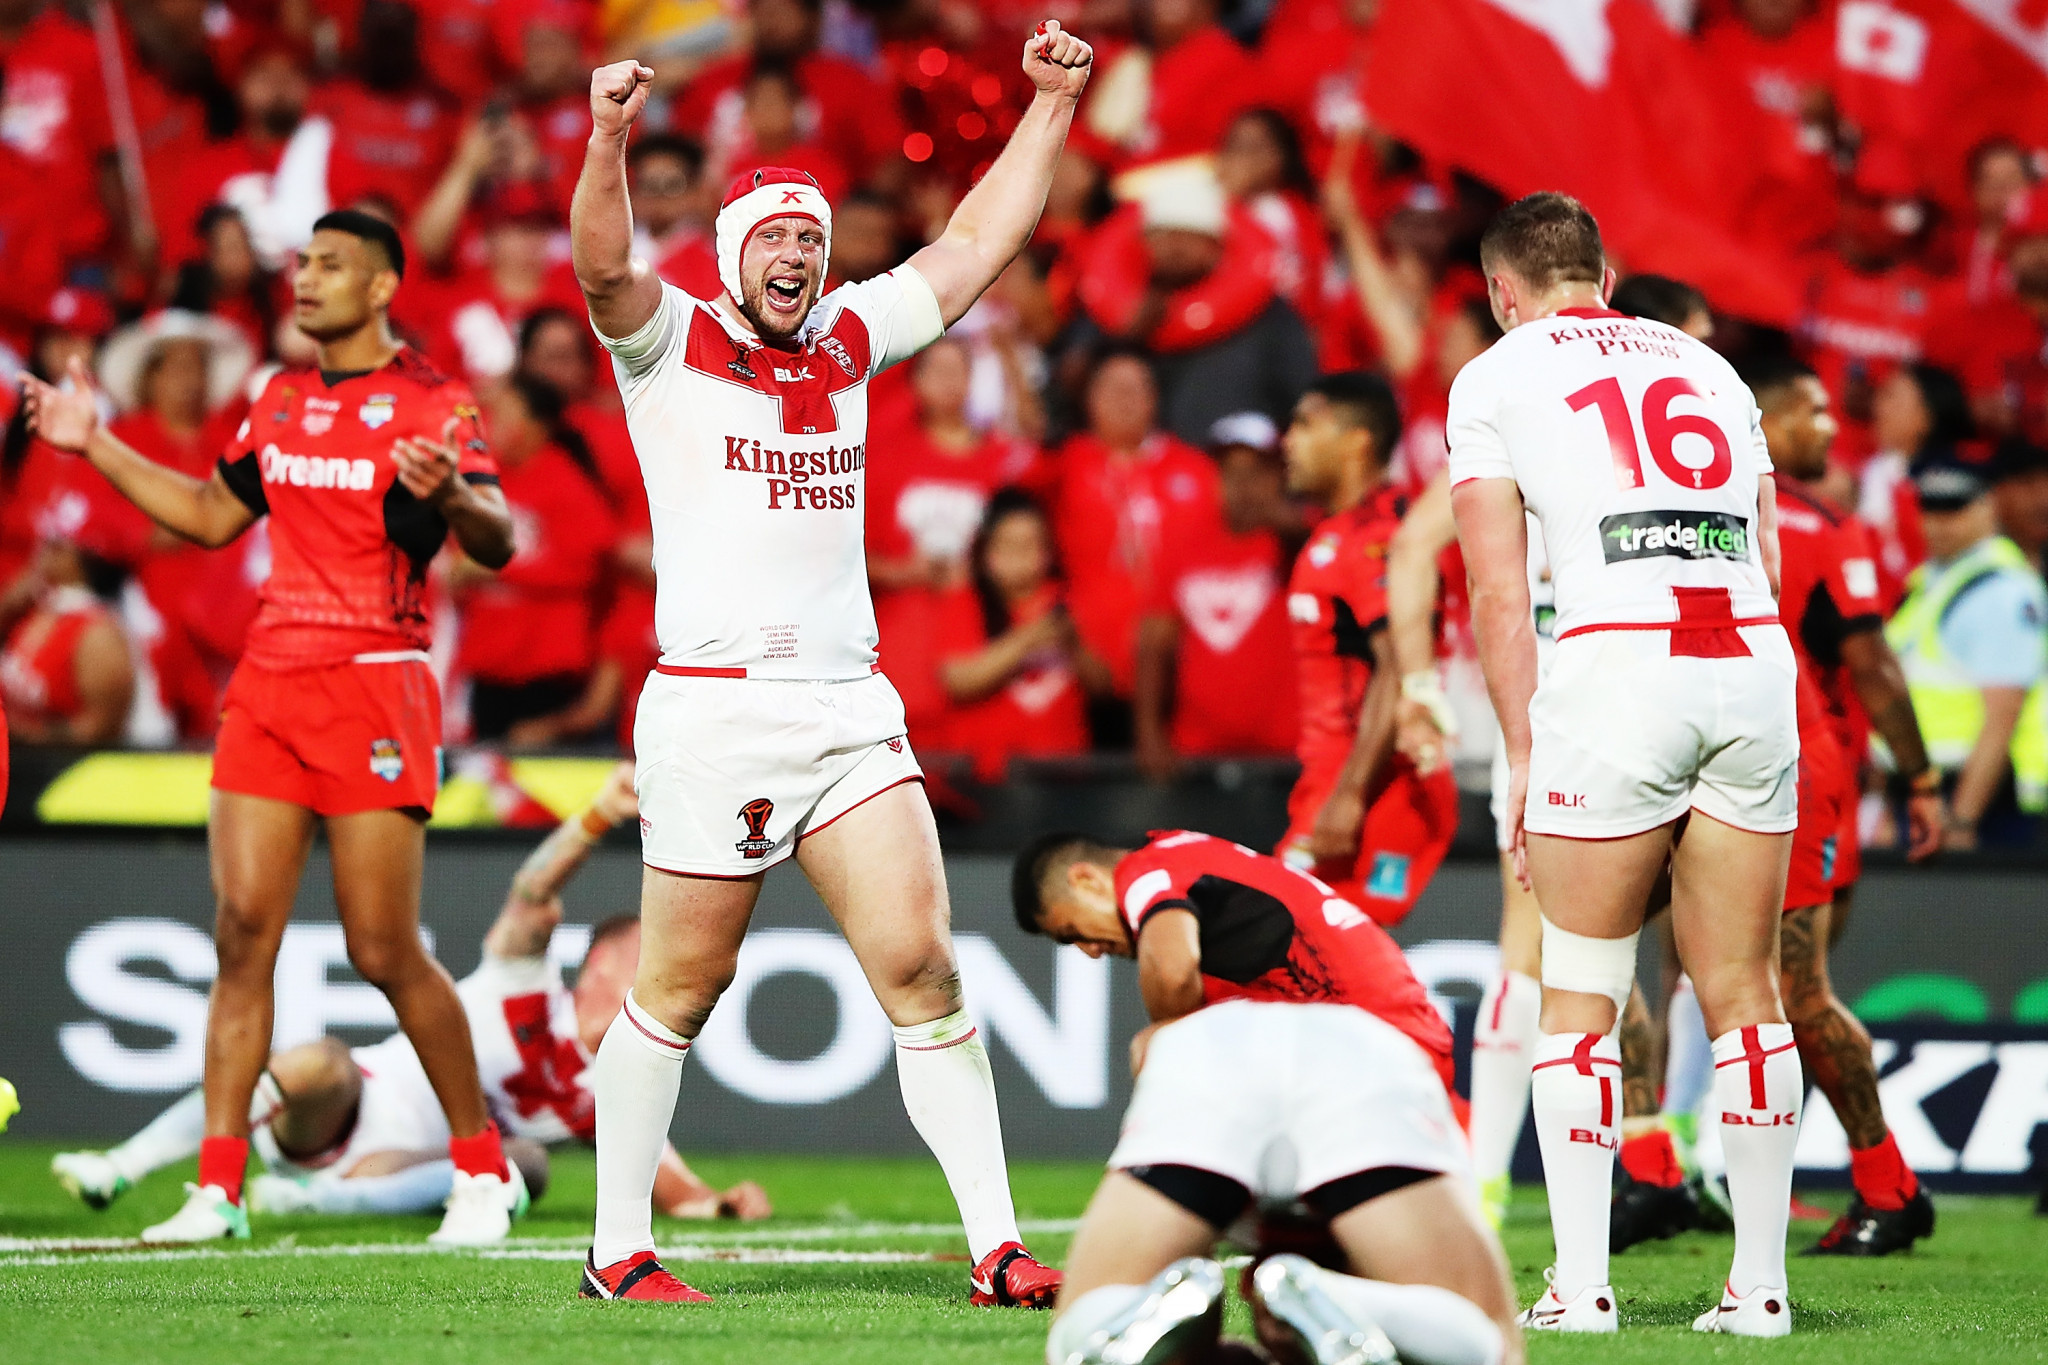 England survive Tonga fightback to reach Rugby League World Cup final